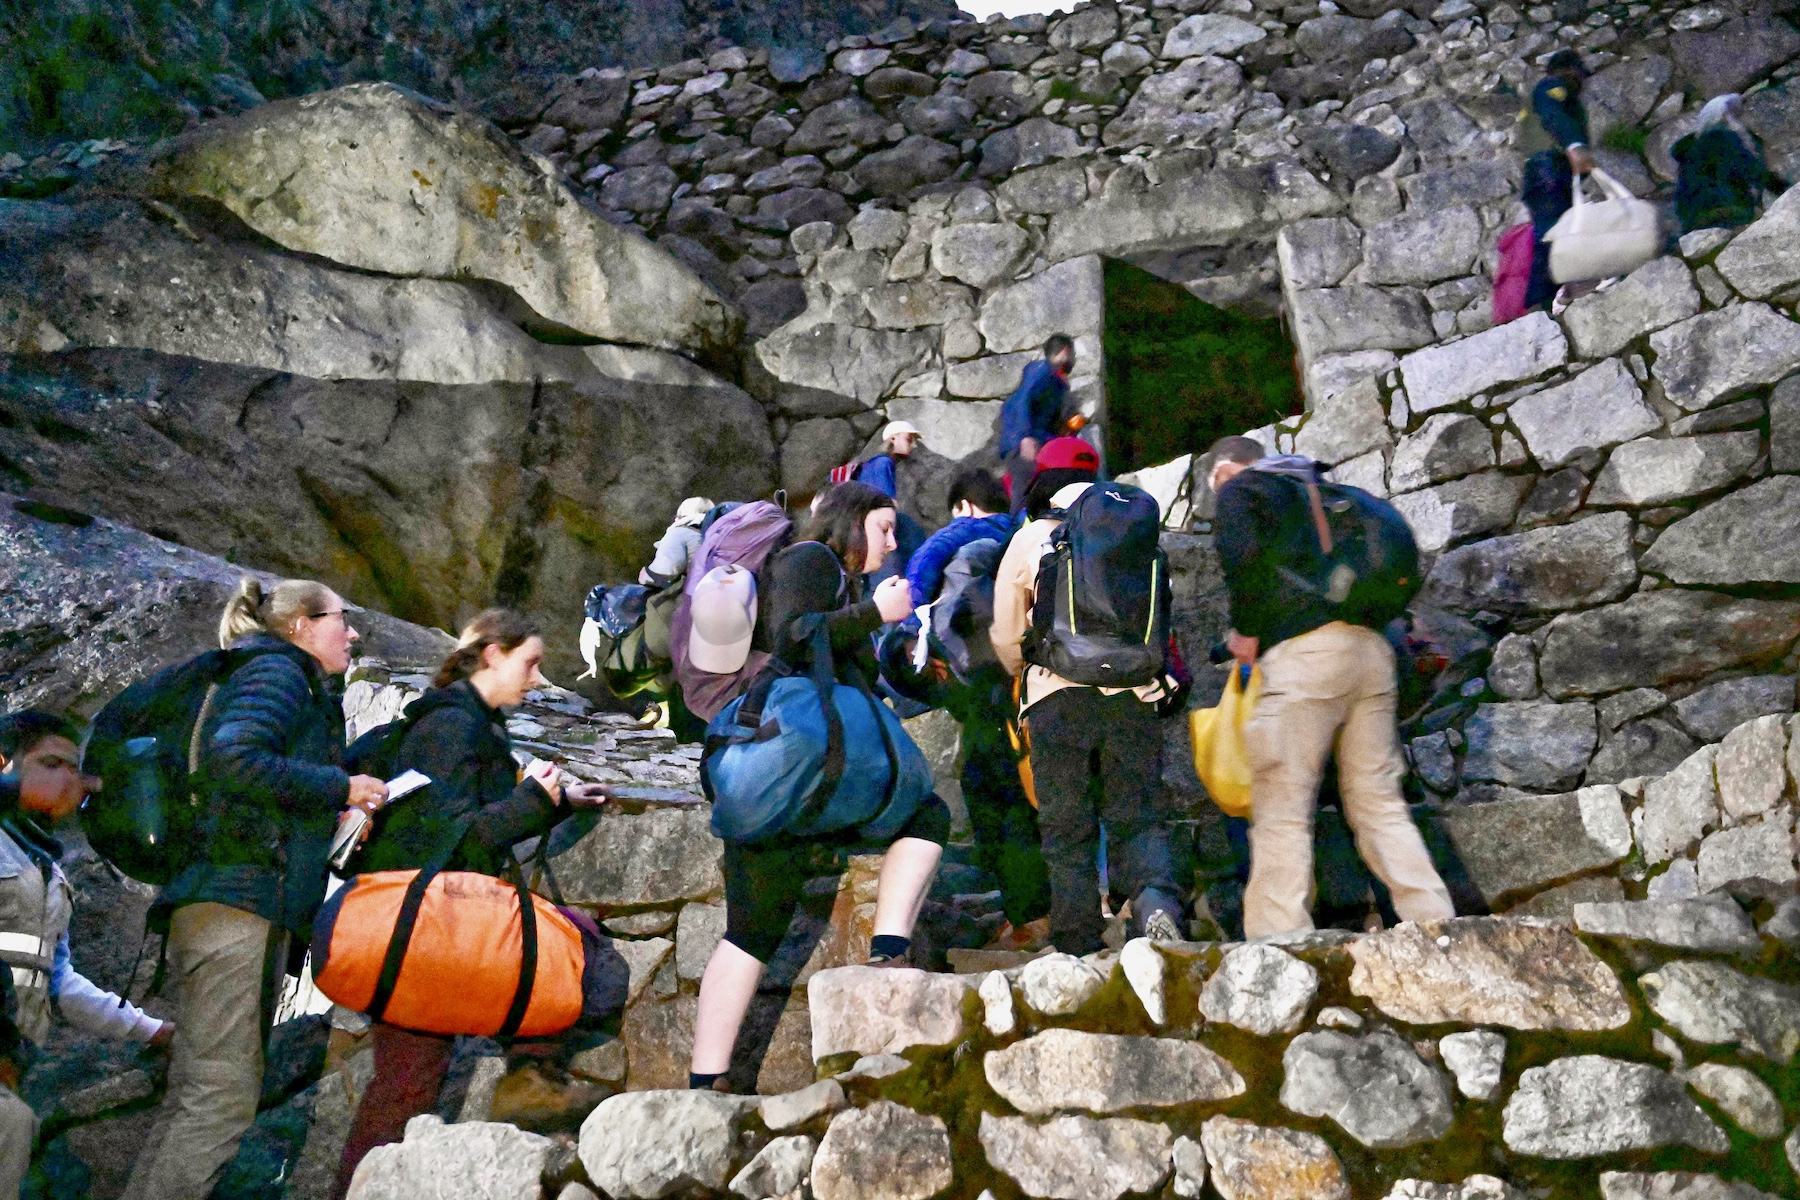 Peru Has Closed Machu Picchu Indefinitely After Tourists Got Trapped Due To Anti-Government Protests